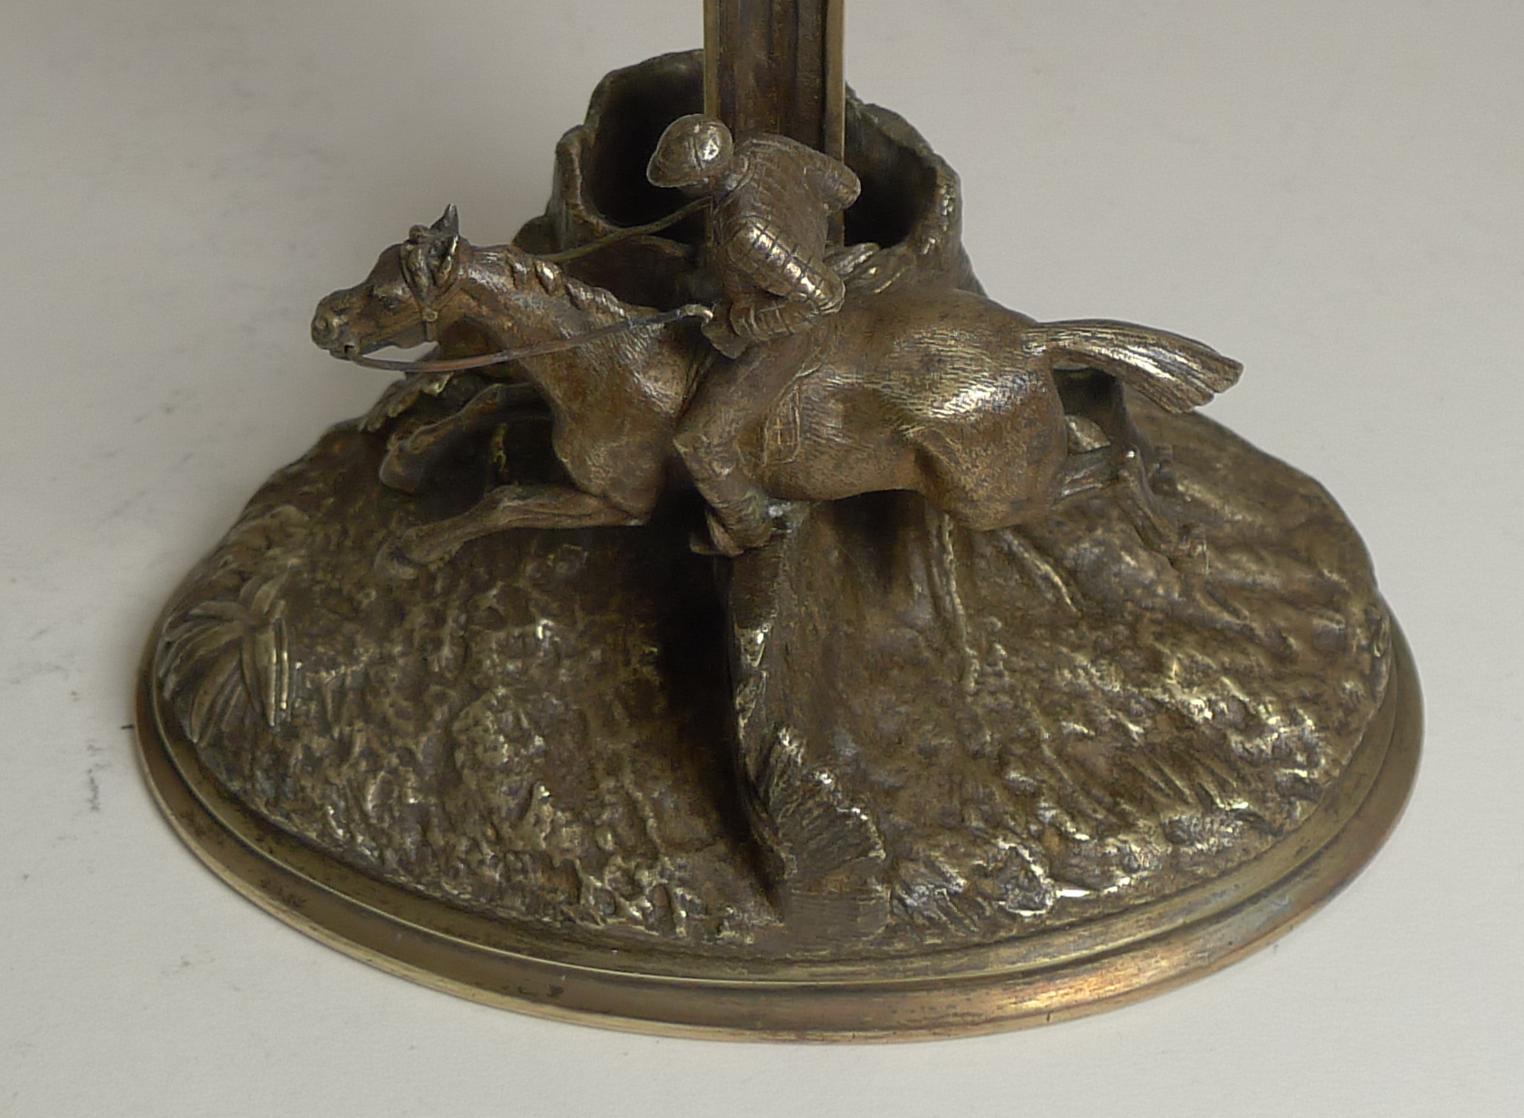 A fabulous antique French pocket watch stand, from the Bordeaux 